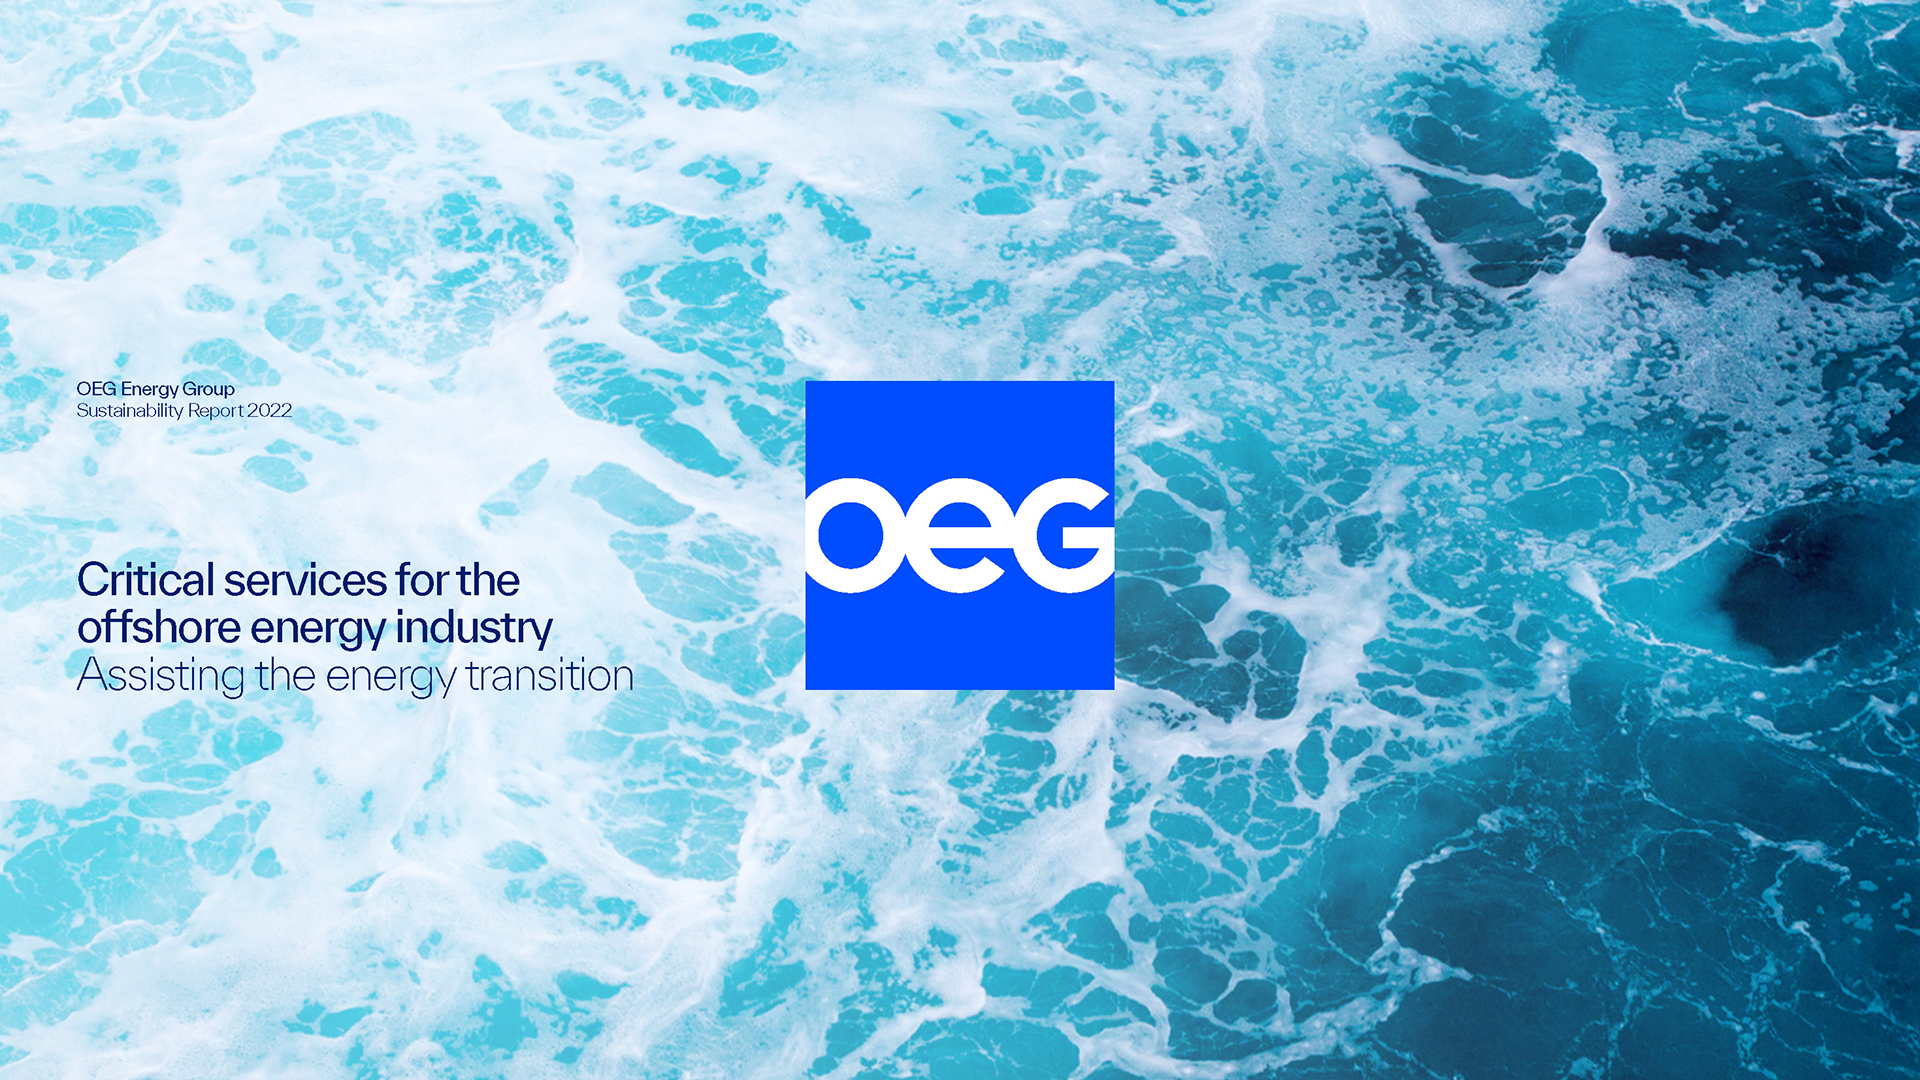 OEGE Sustainability Report Cover